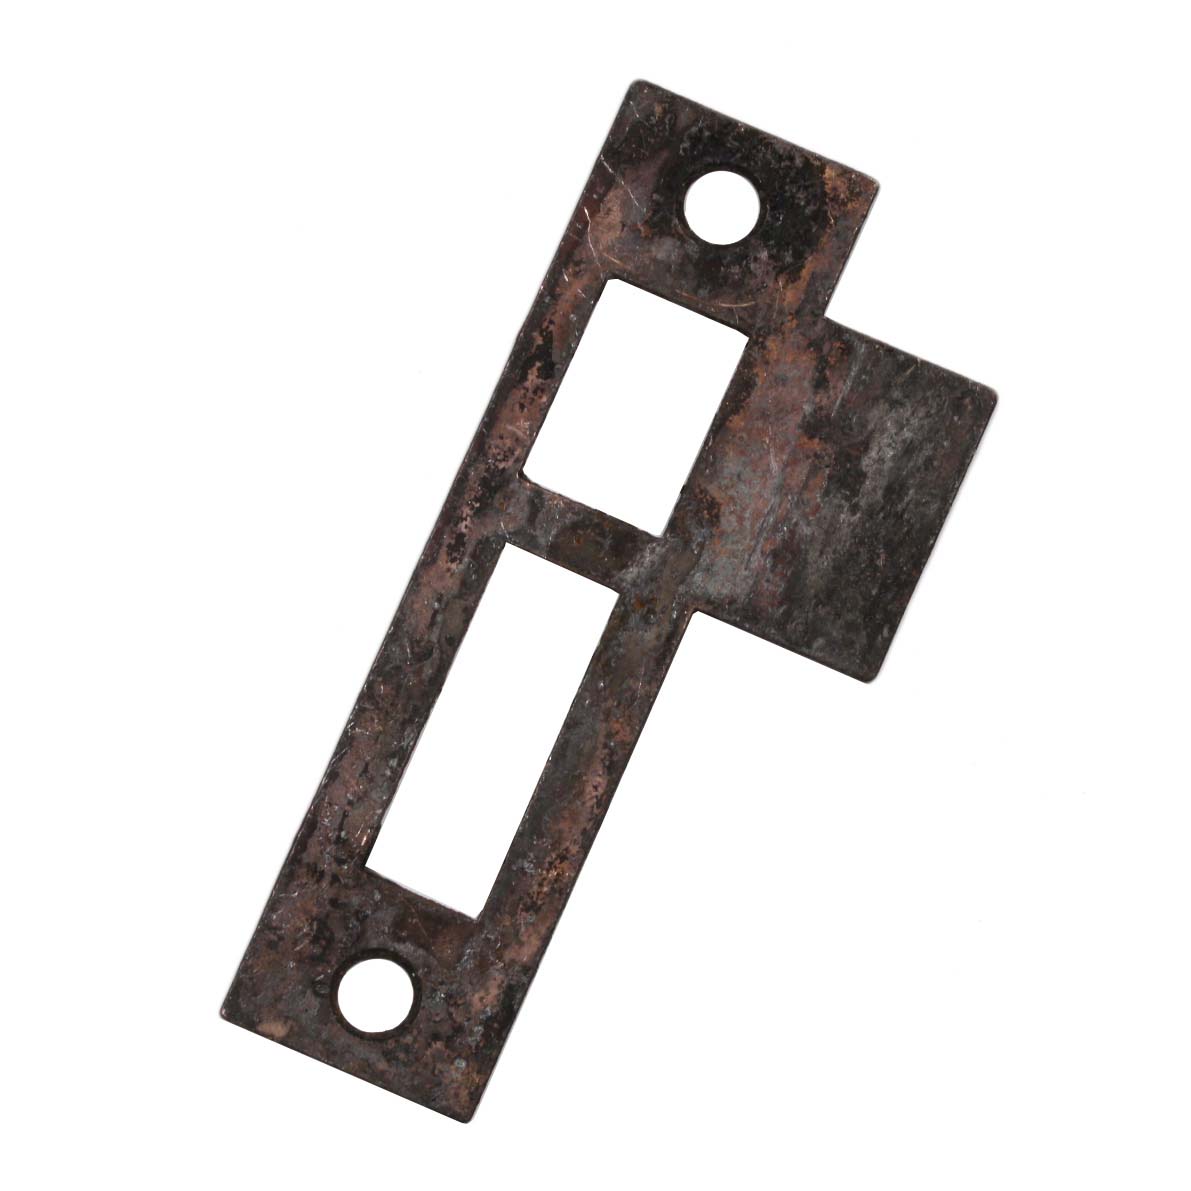 SOLD Antique Salvaged Strike Plates for Mortise Locks, 7/32” Spacing-0